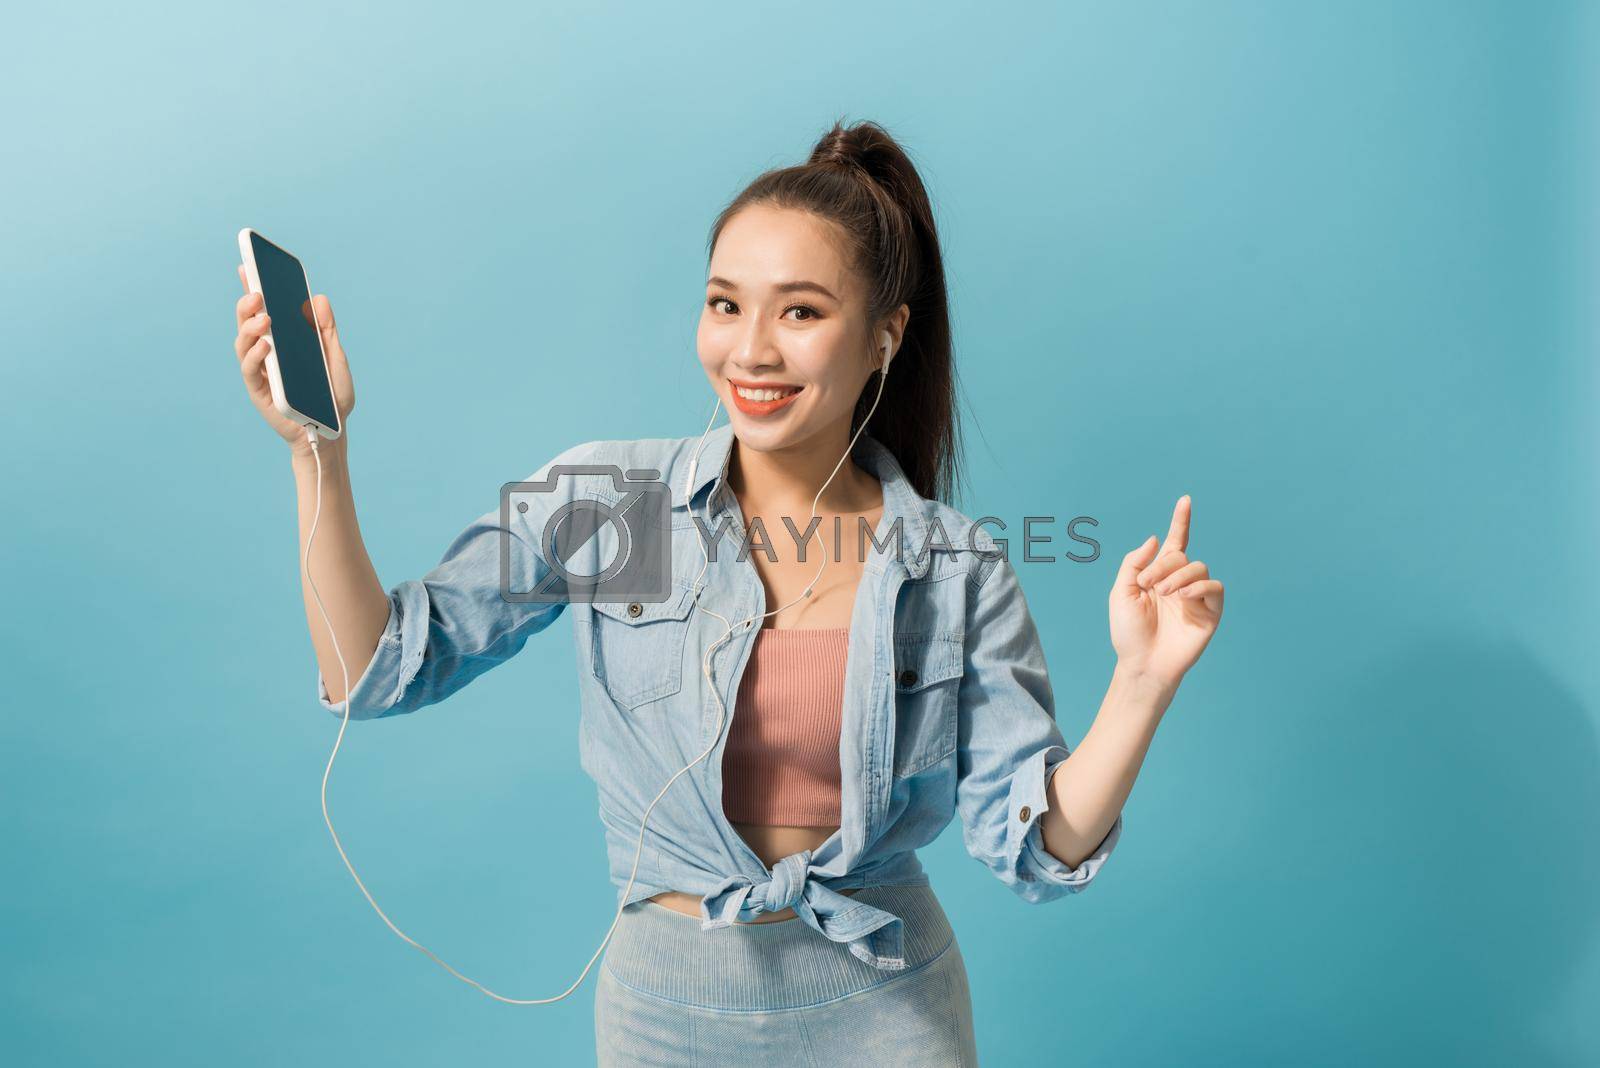 Royalty free image of Cheerful woman in headphones listening to music and dancing isolated over blue background by makidotvn